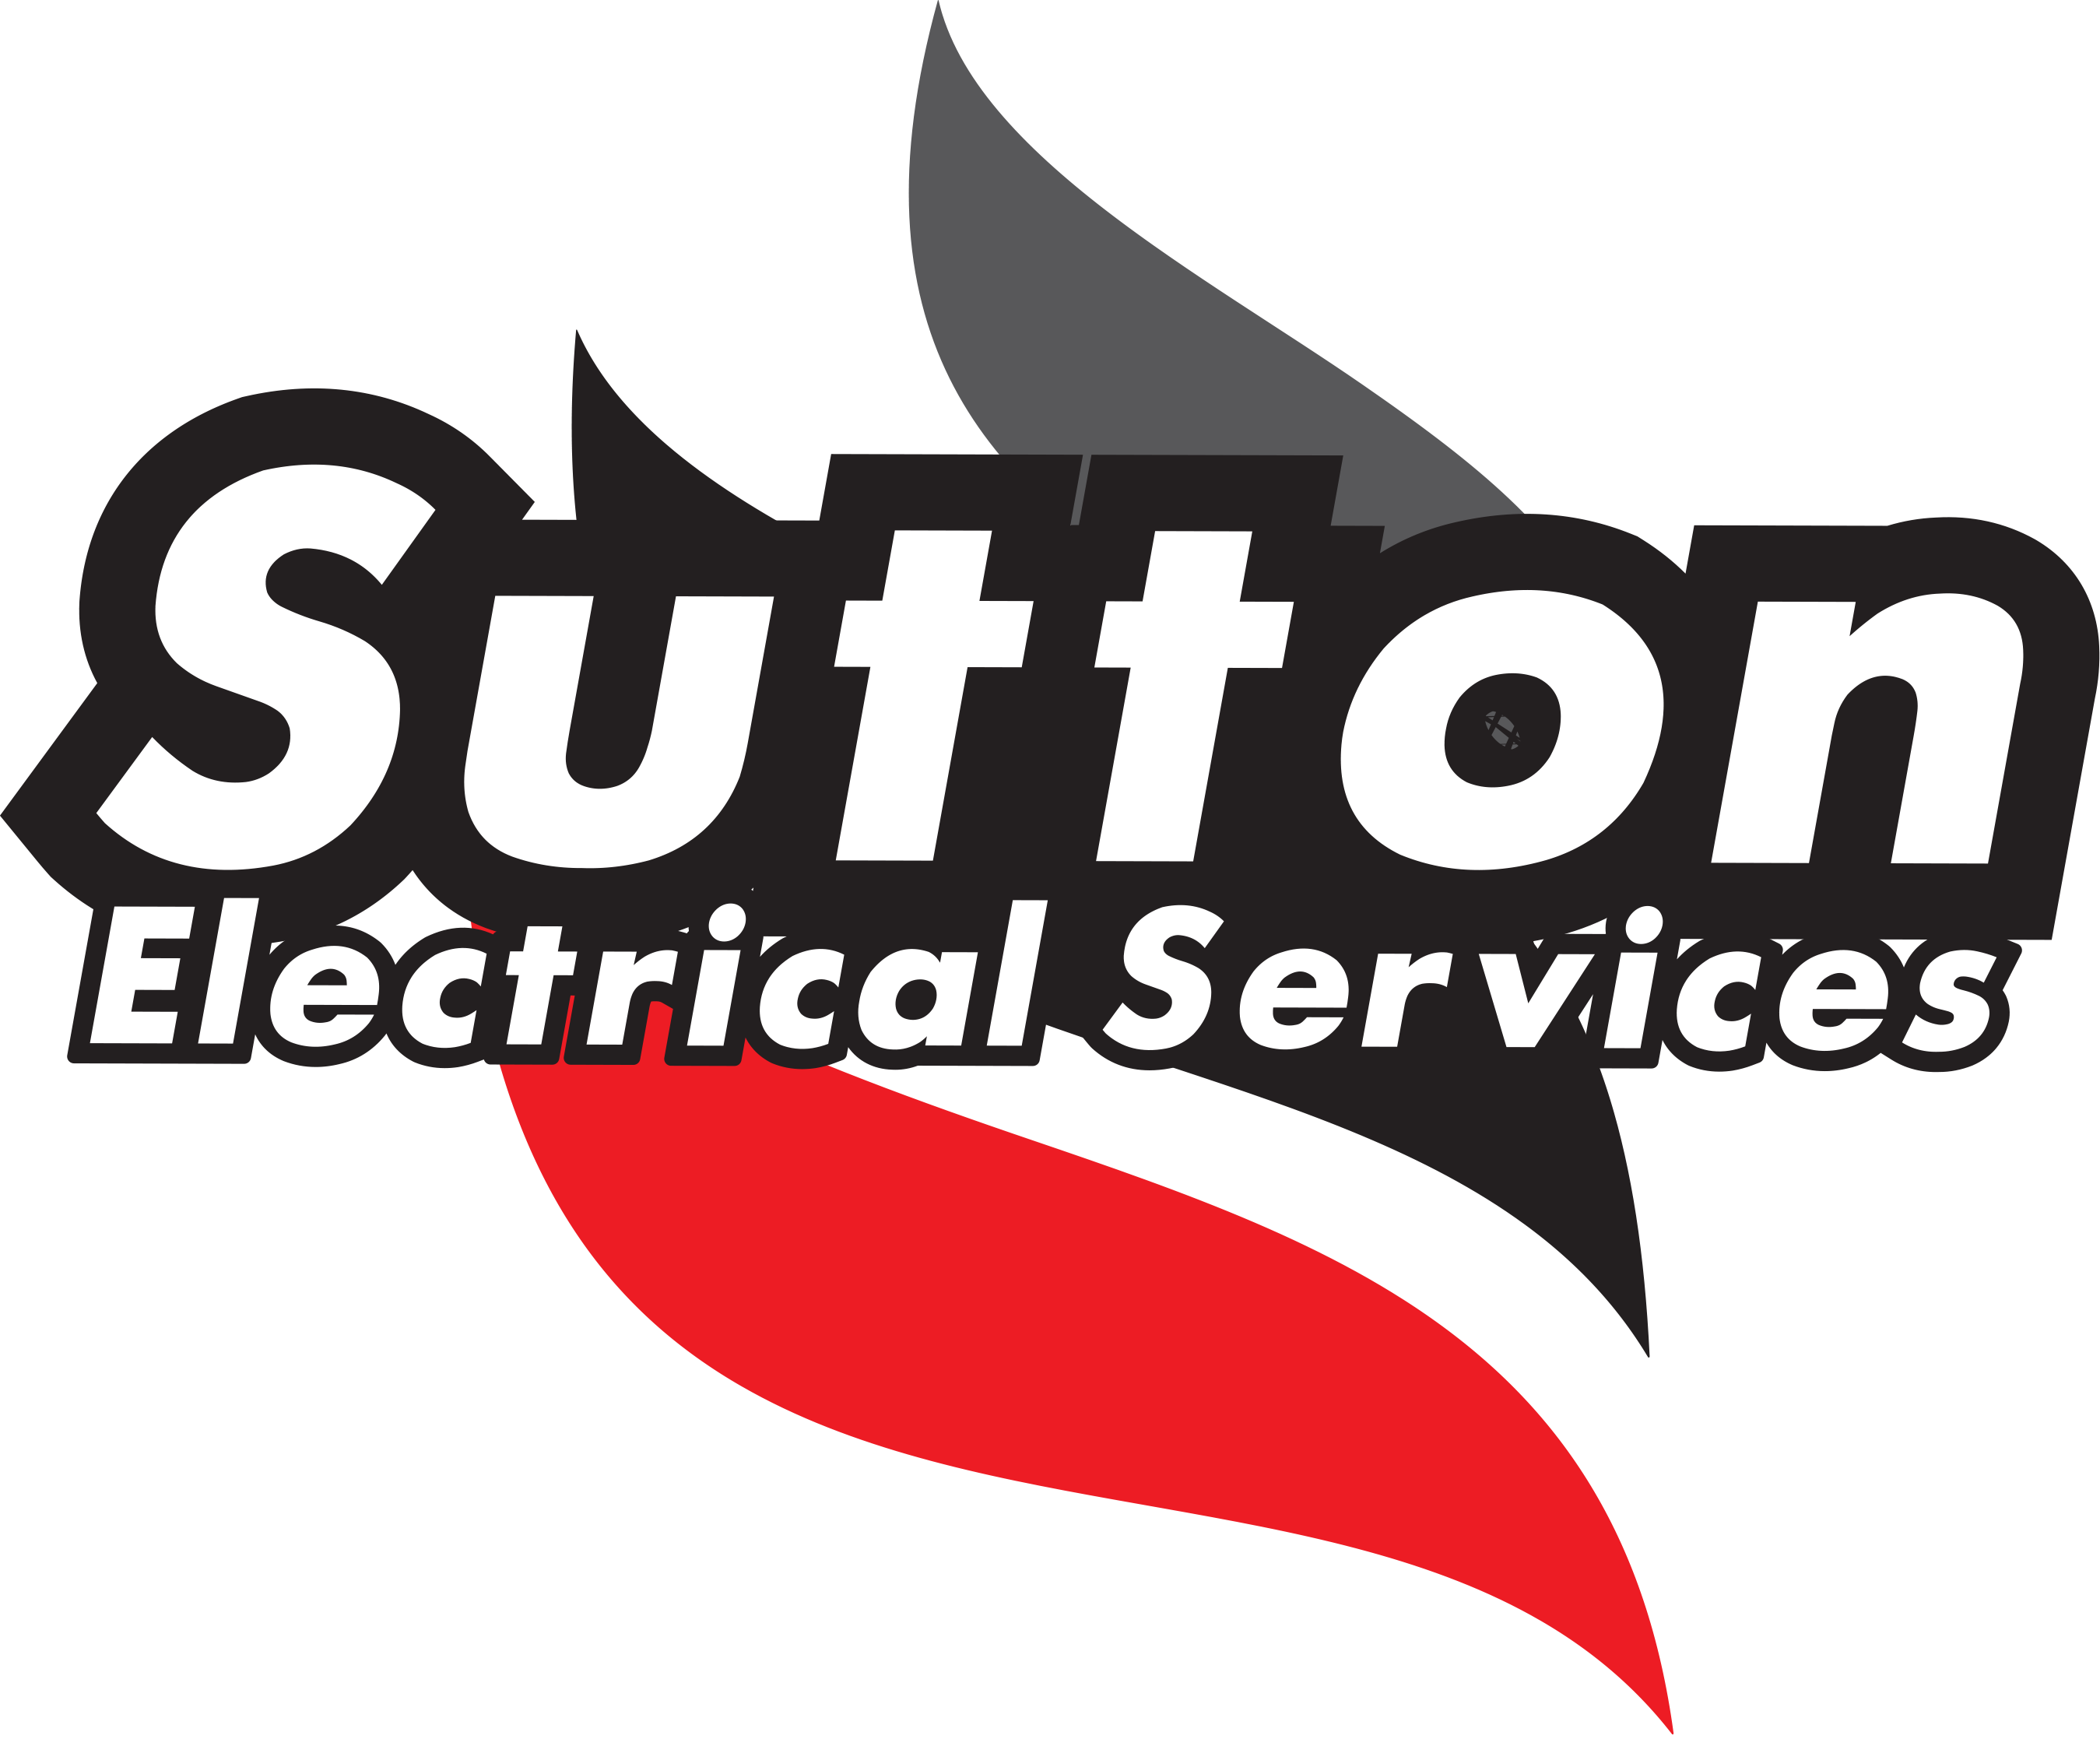 Electrician Services in Sutton